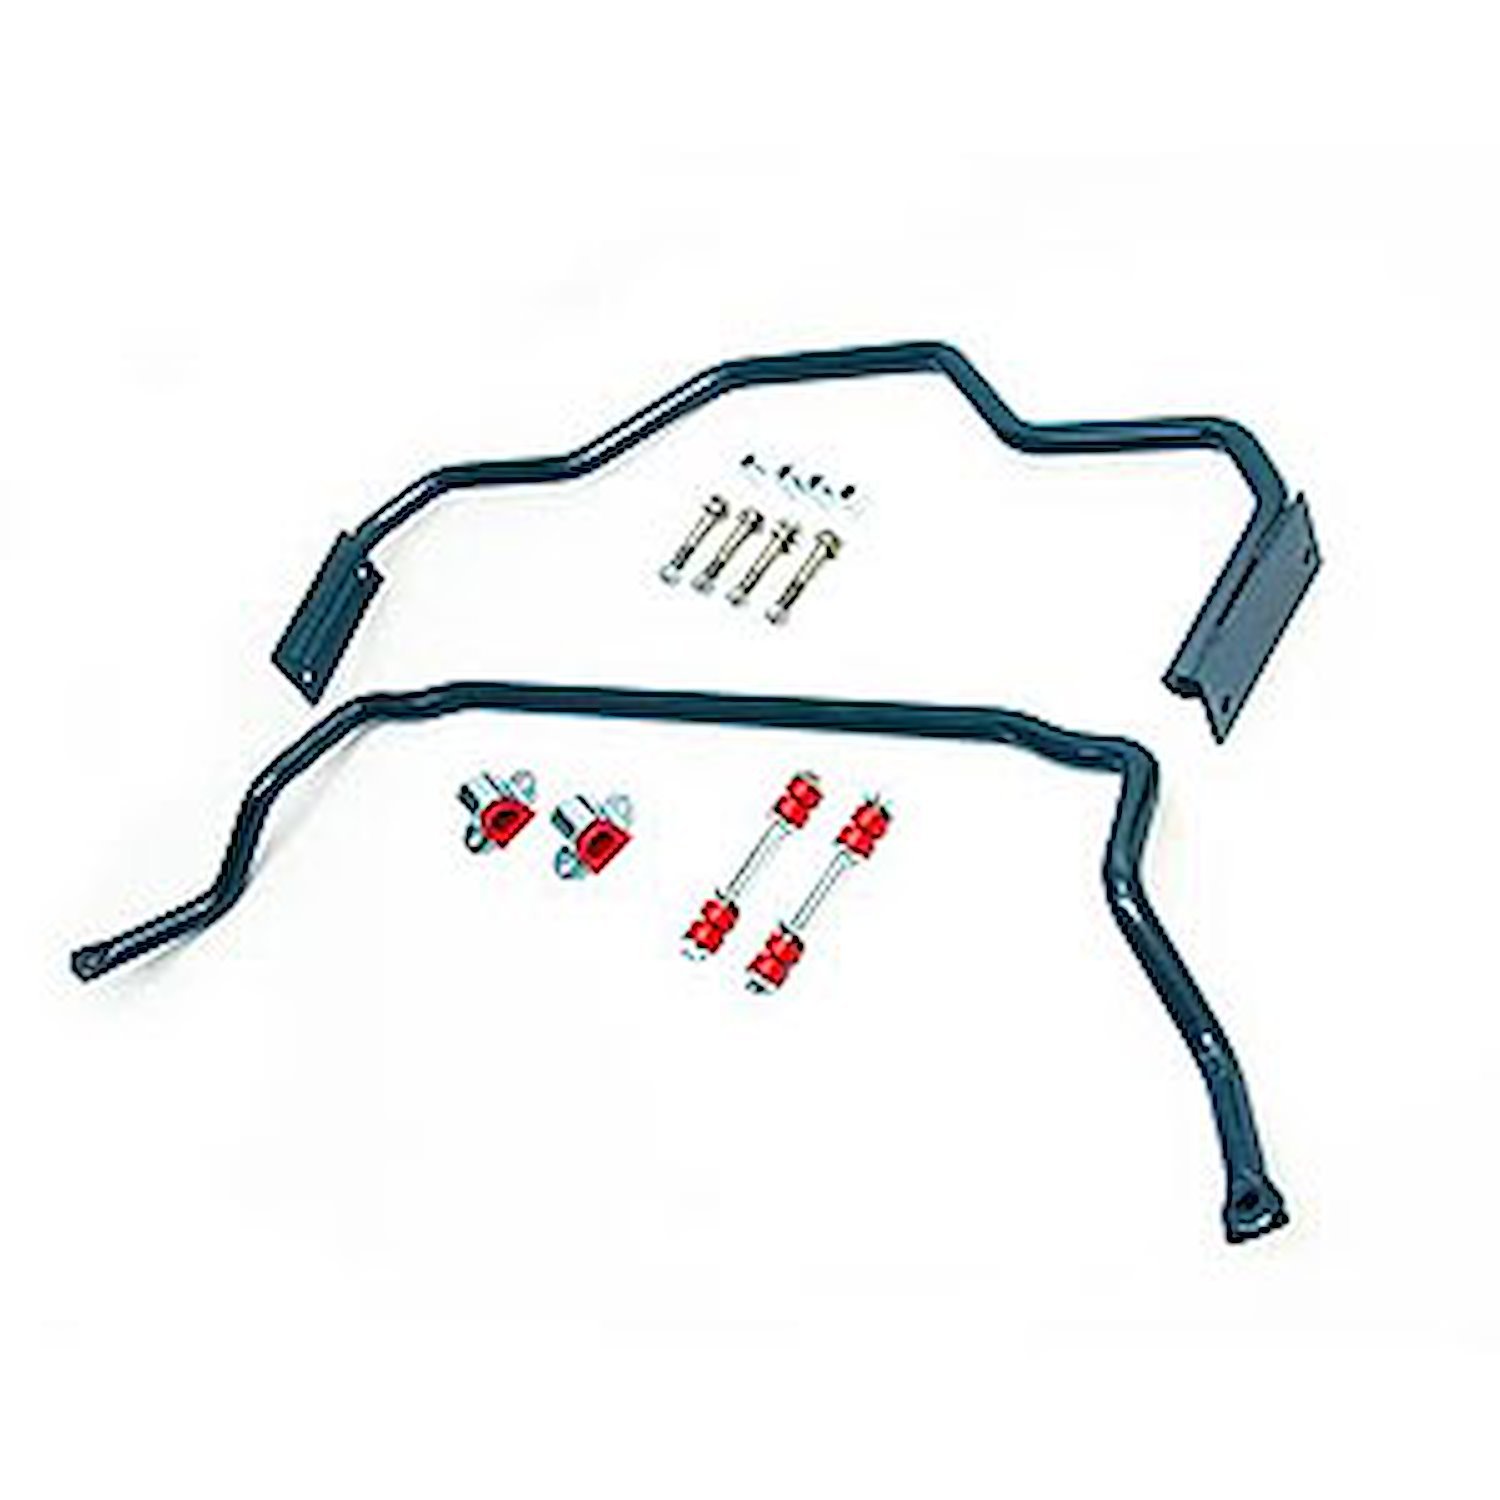 Front/Rear Sway Bar Kit for 1995-2004 GM S-Series Blazer/Jimmy